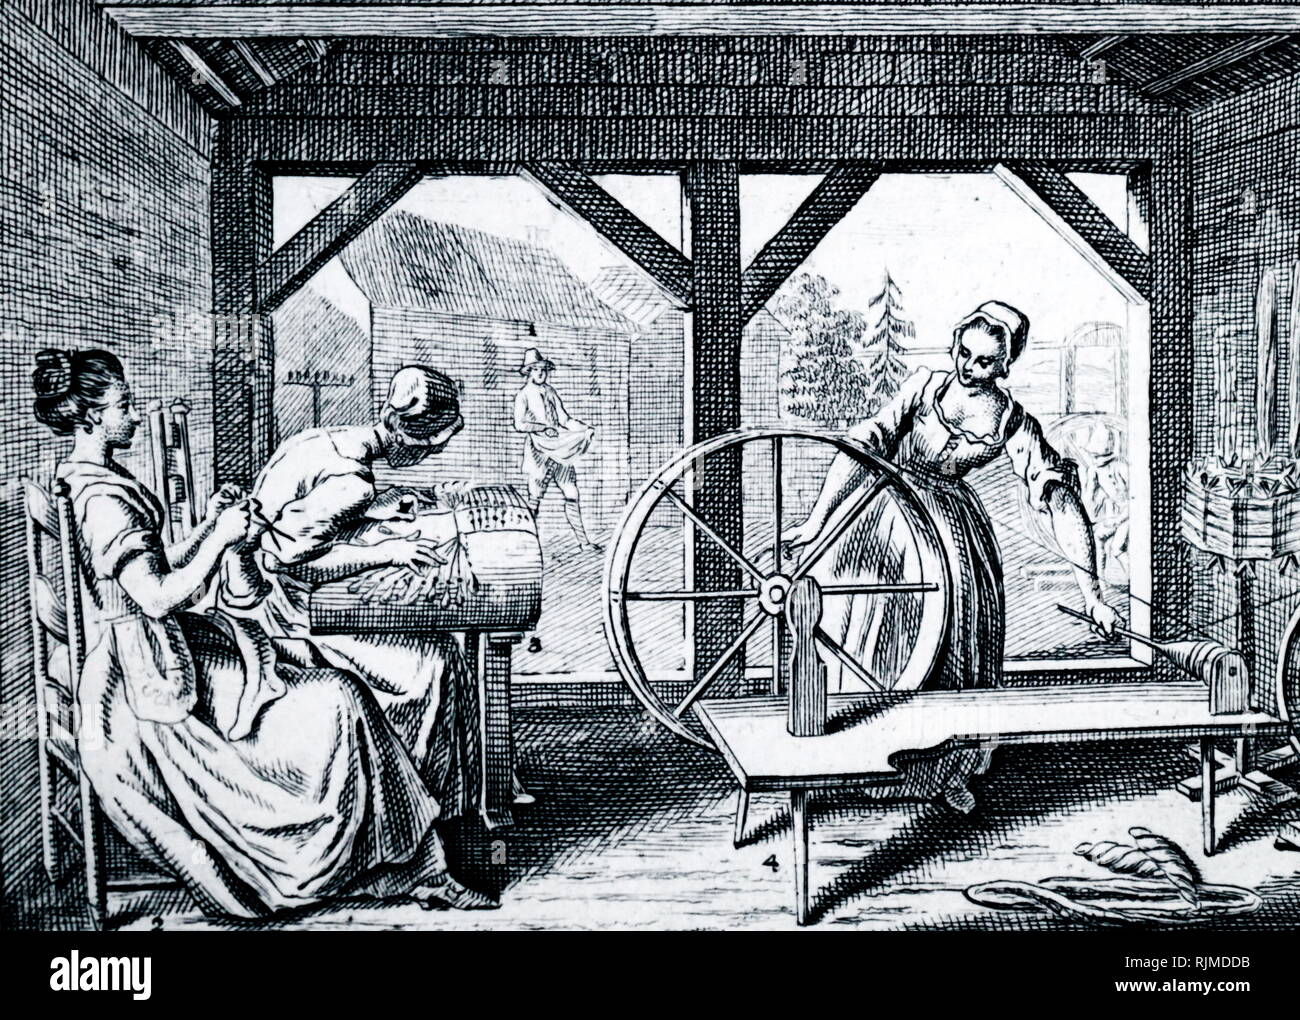 Illustration showing Women KNITTING, making PILLOW LACE and SPINNING. Engraving after Daniel Nicolas Chodowiecki (1726-1801) the Hogarth of Germany. Stock Photo